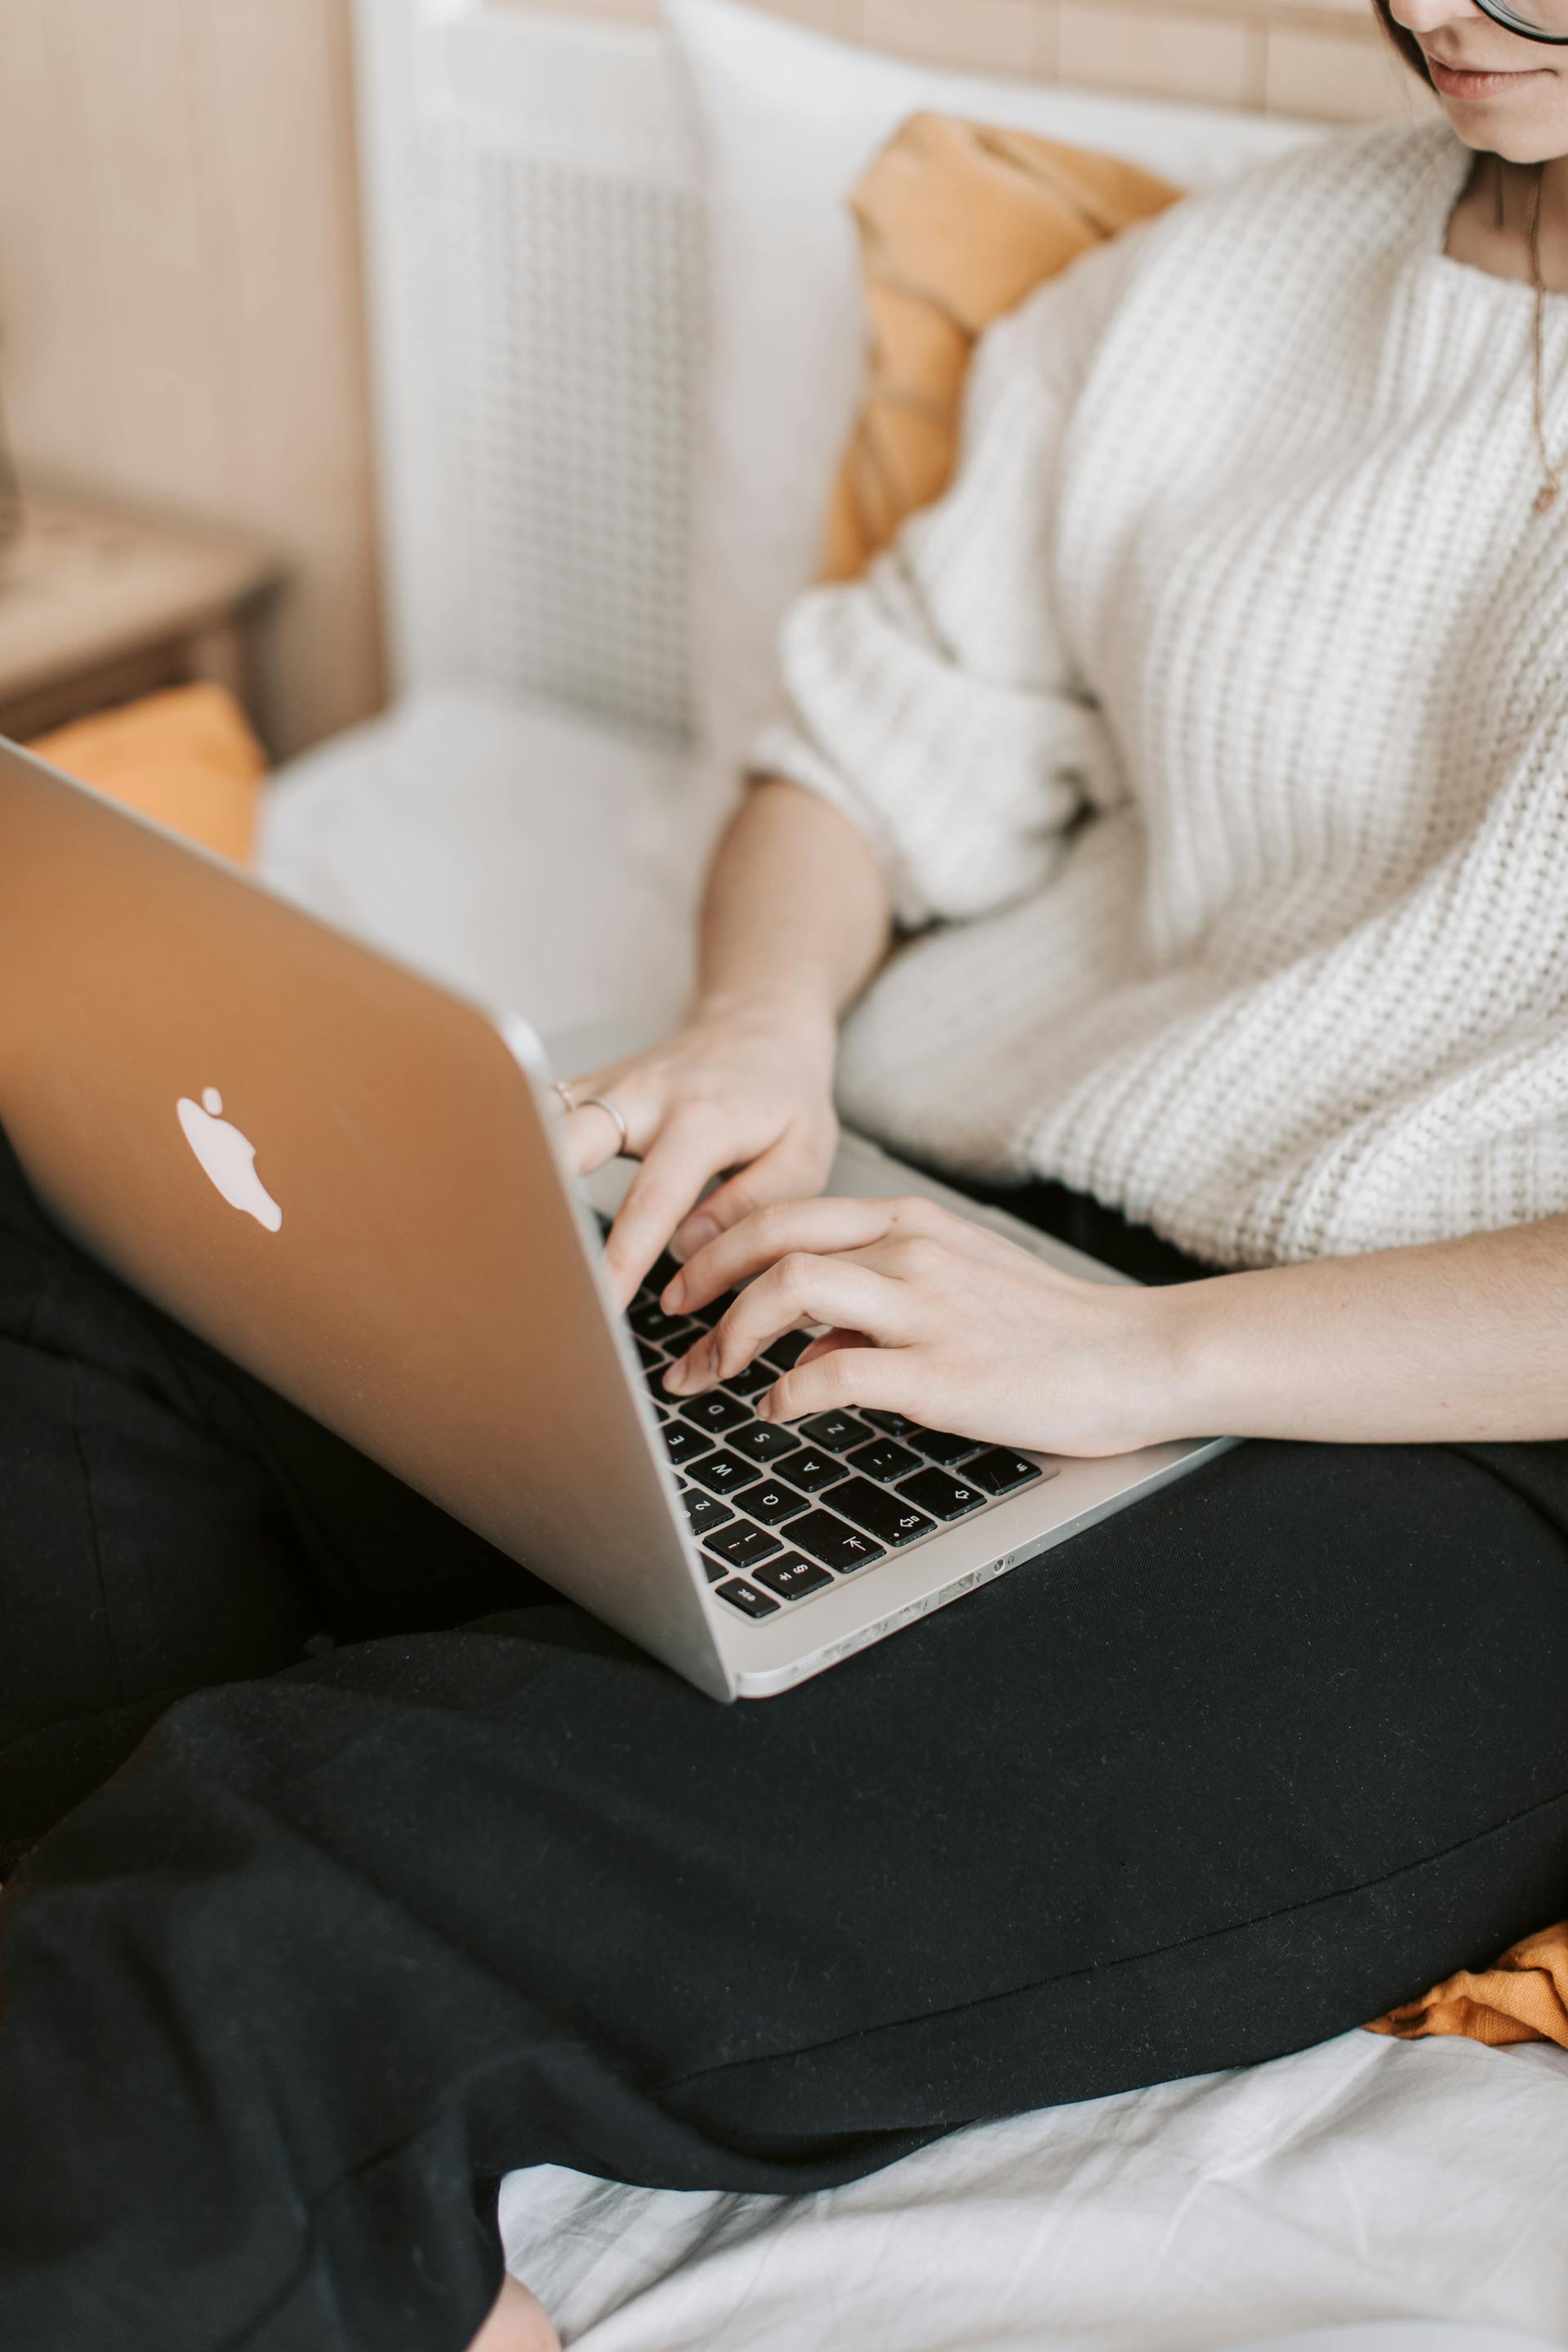 A woman using her laptop while sitting in bed | Source: Pexels